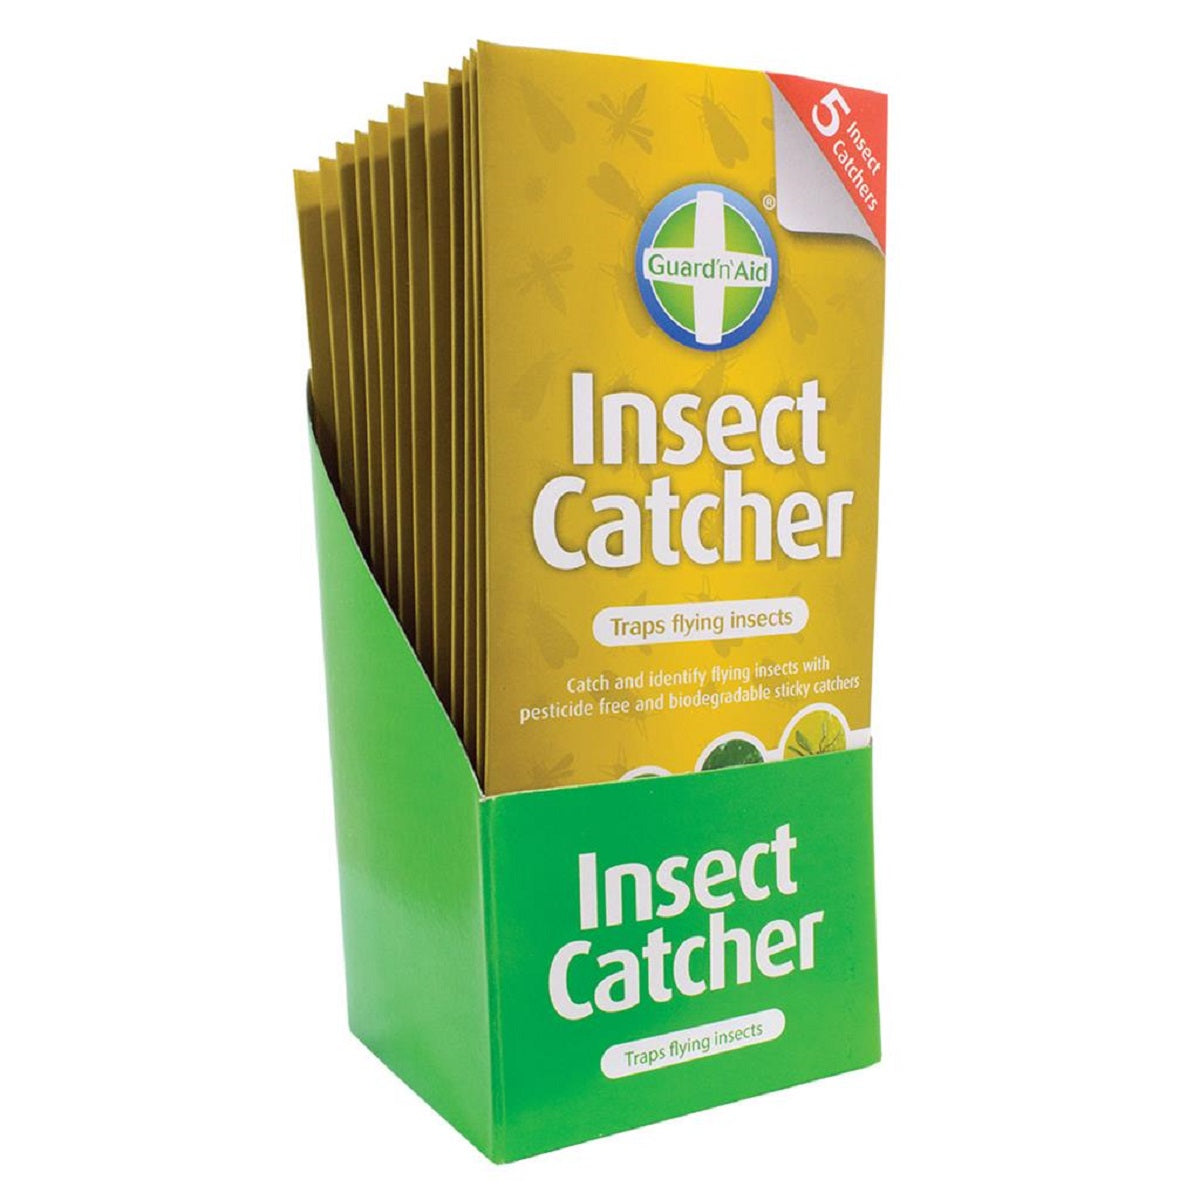 Guard'n'Aid Insect Catcher – Gelbe Klebefalle